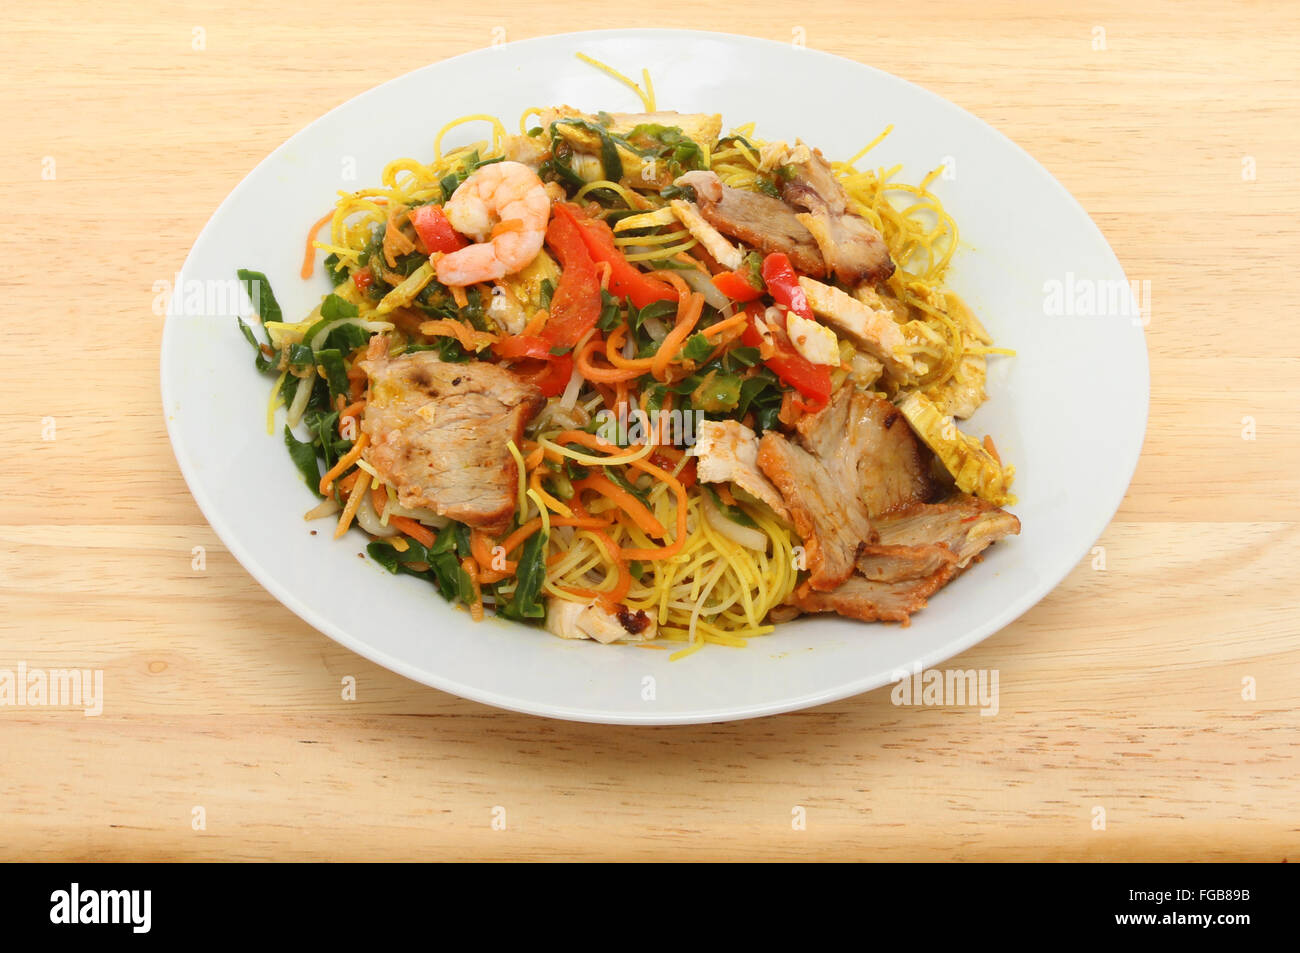 Chinese meal, Singapore noodles in a bowl on a wooden tabletop Stock Photo